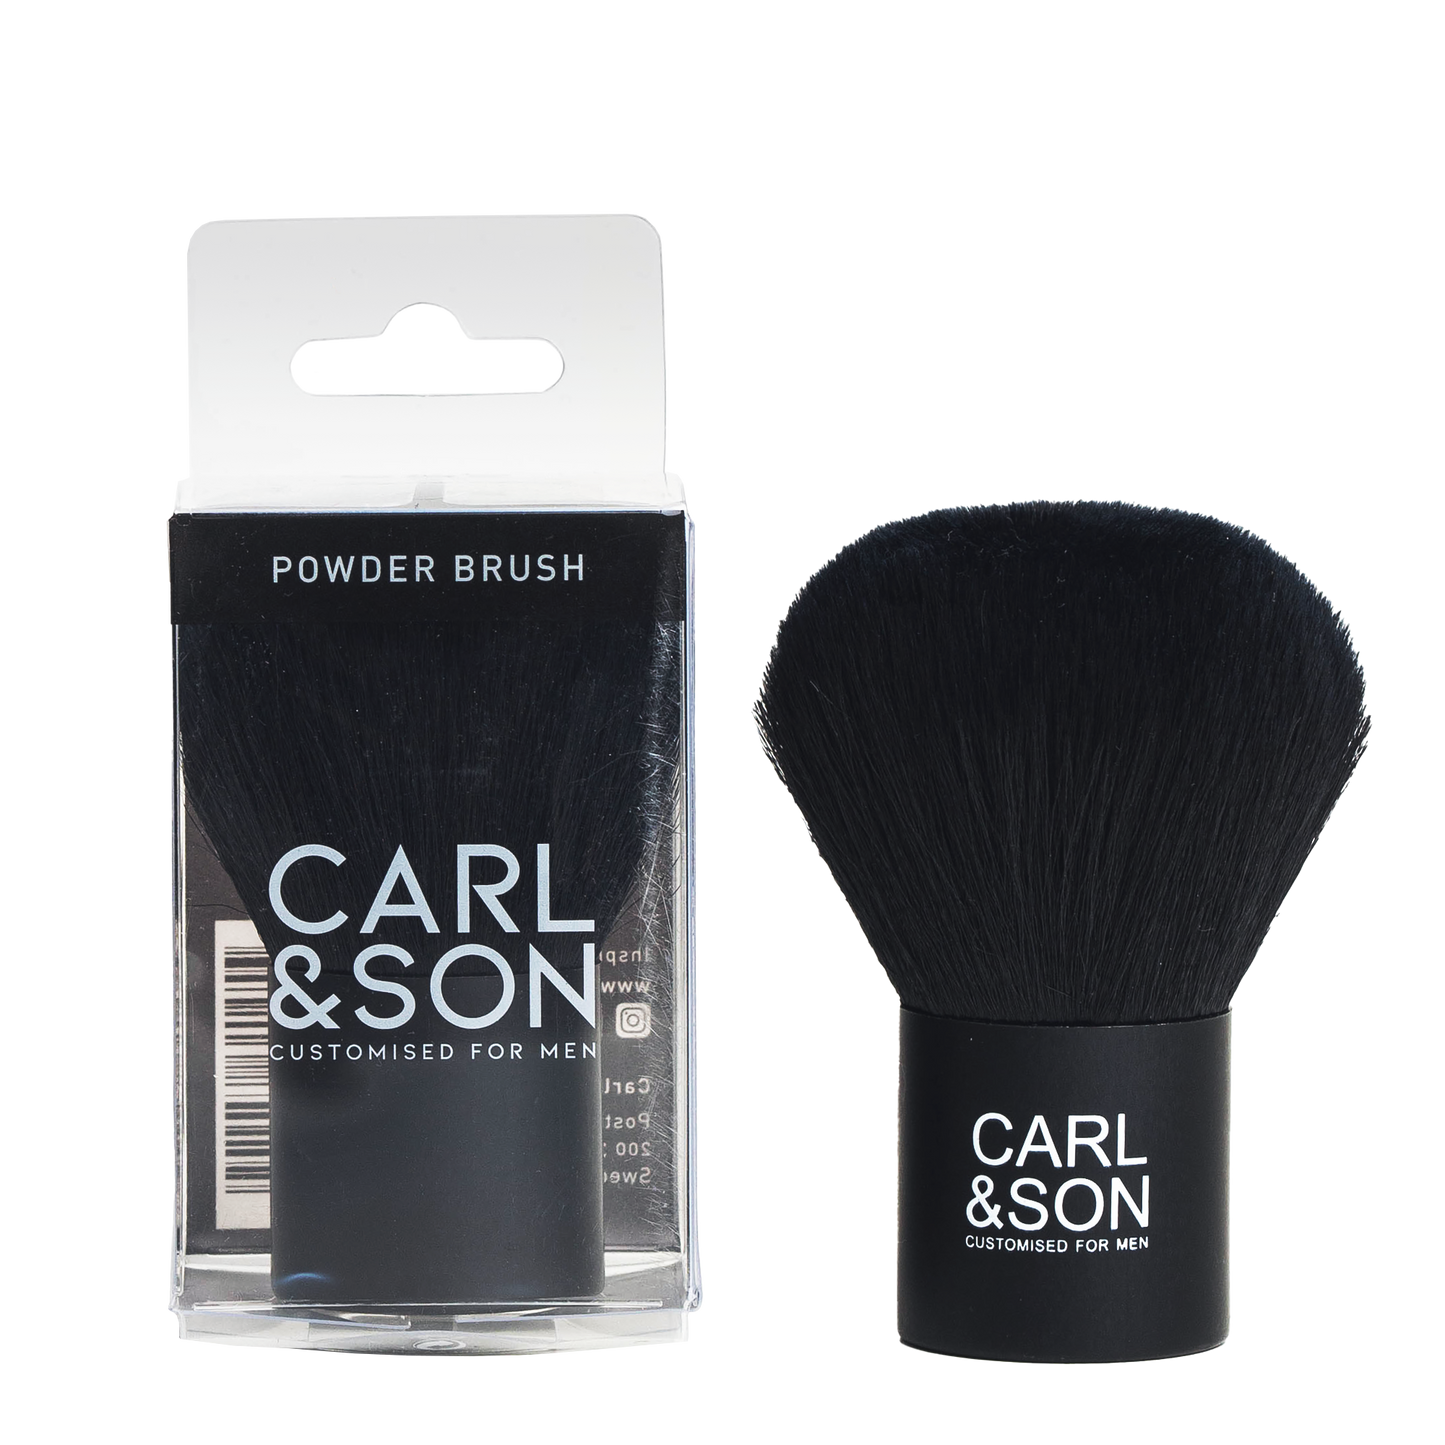 powder brush in cartonage and without besides